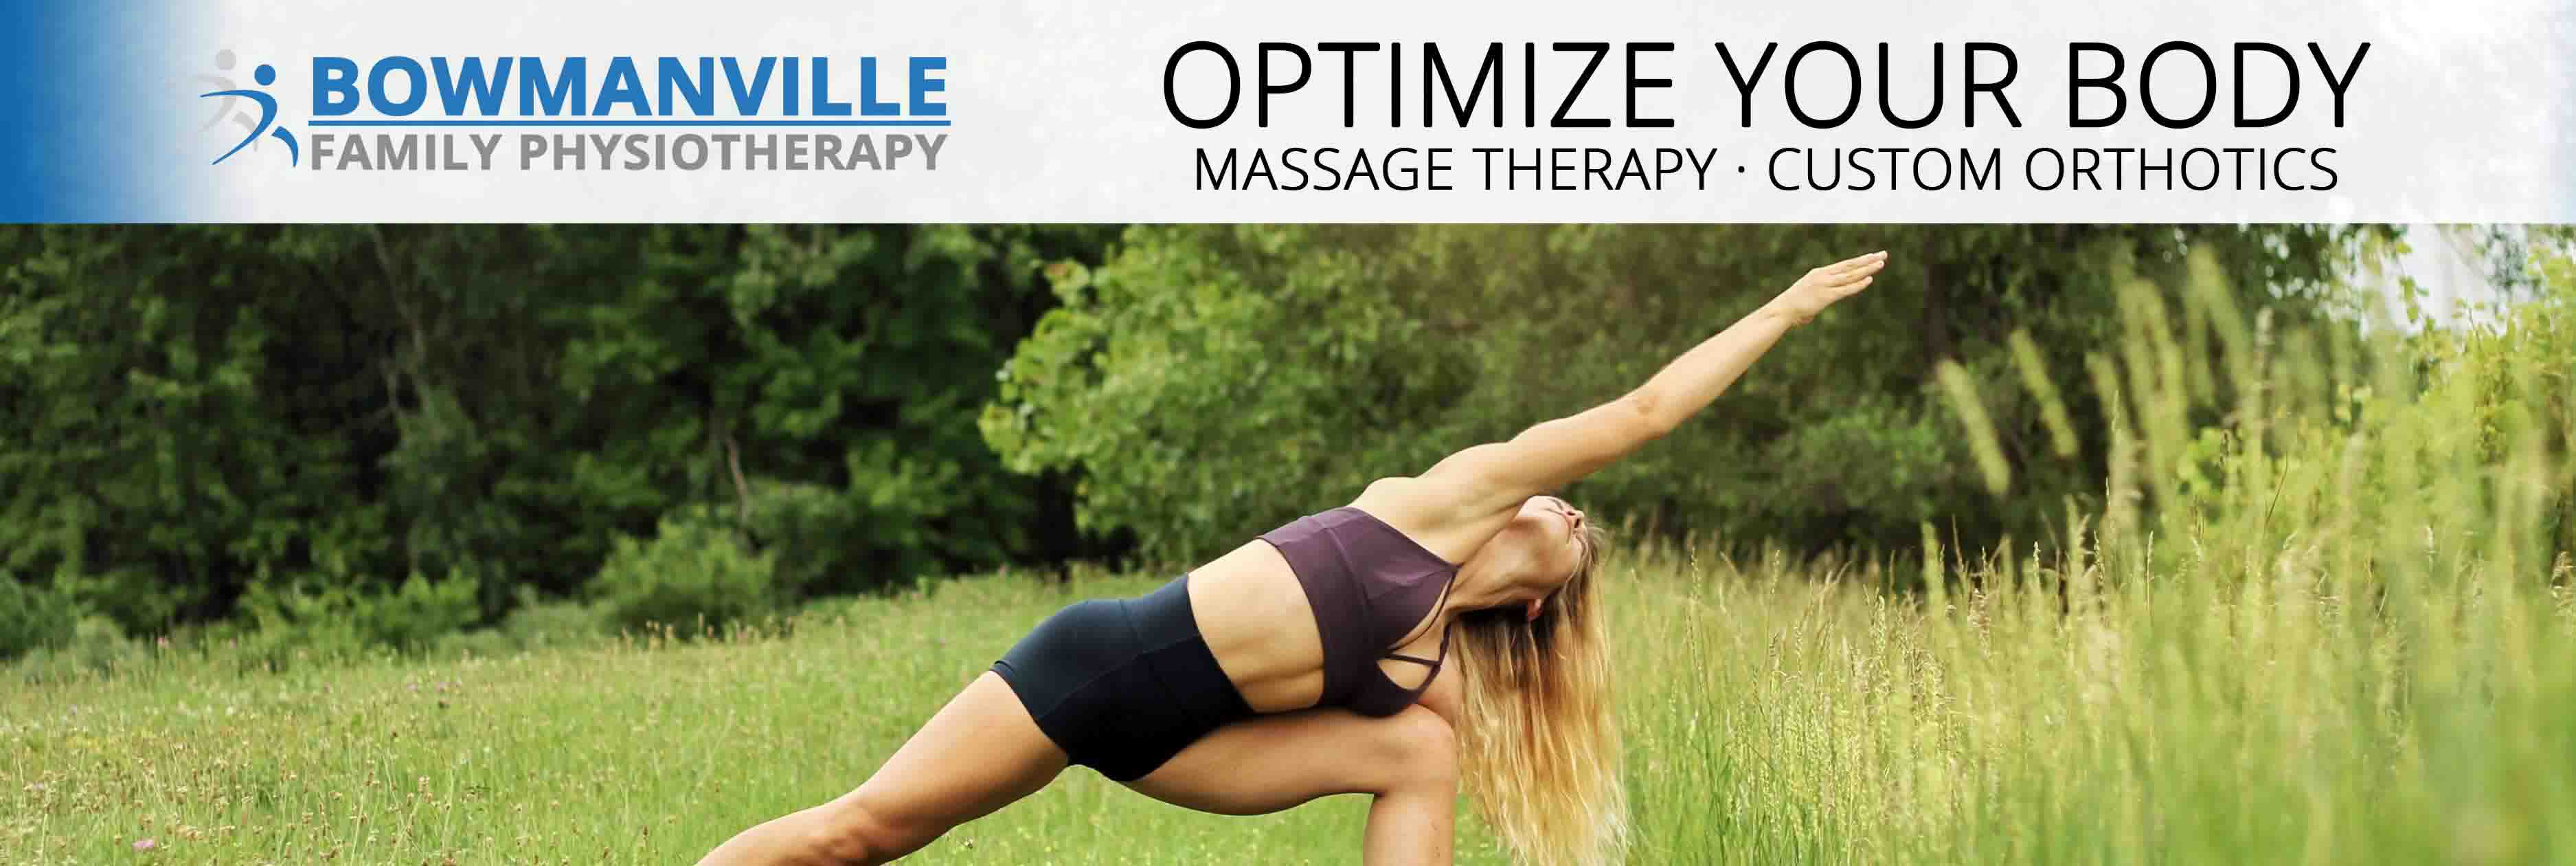 massage therapist rmt in courtice